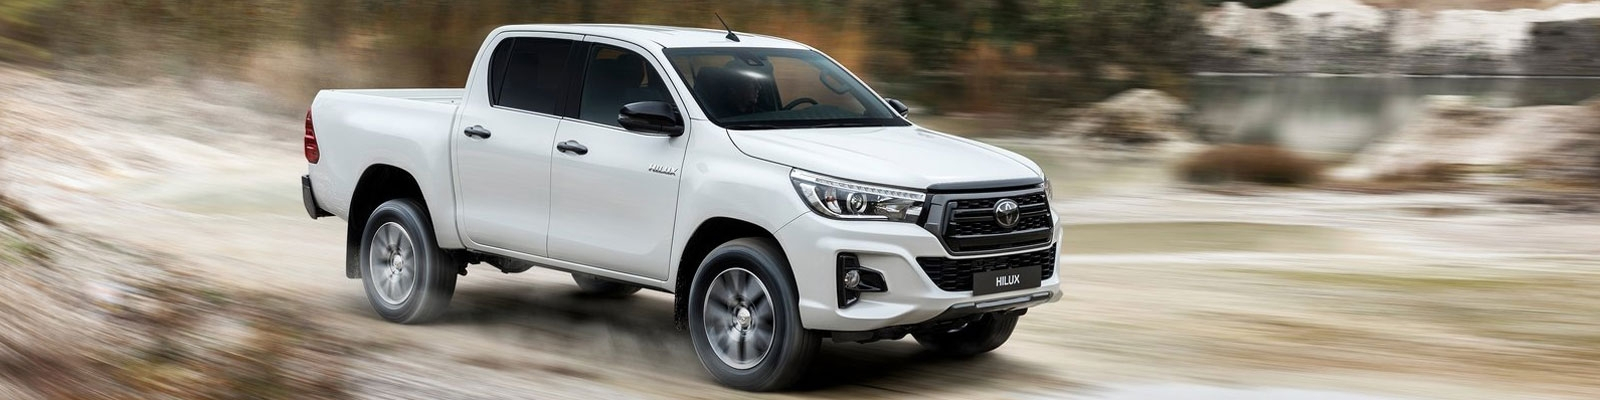 Accessories for Toyota Hilux Double Cab